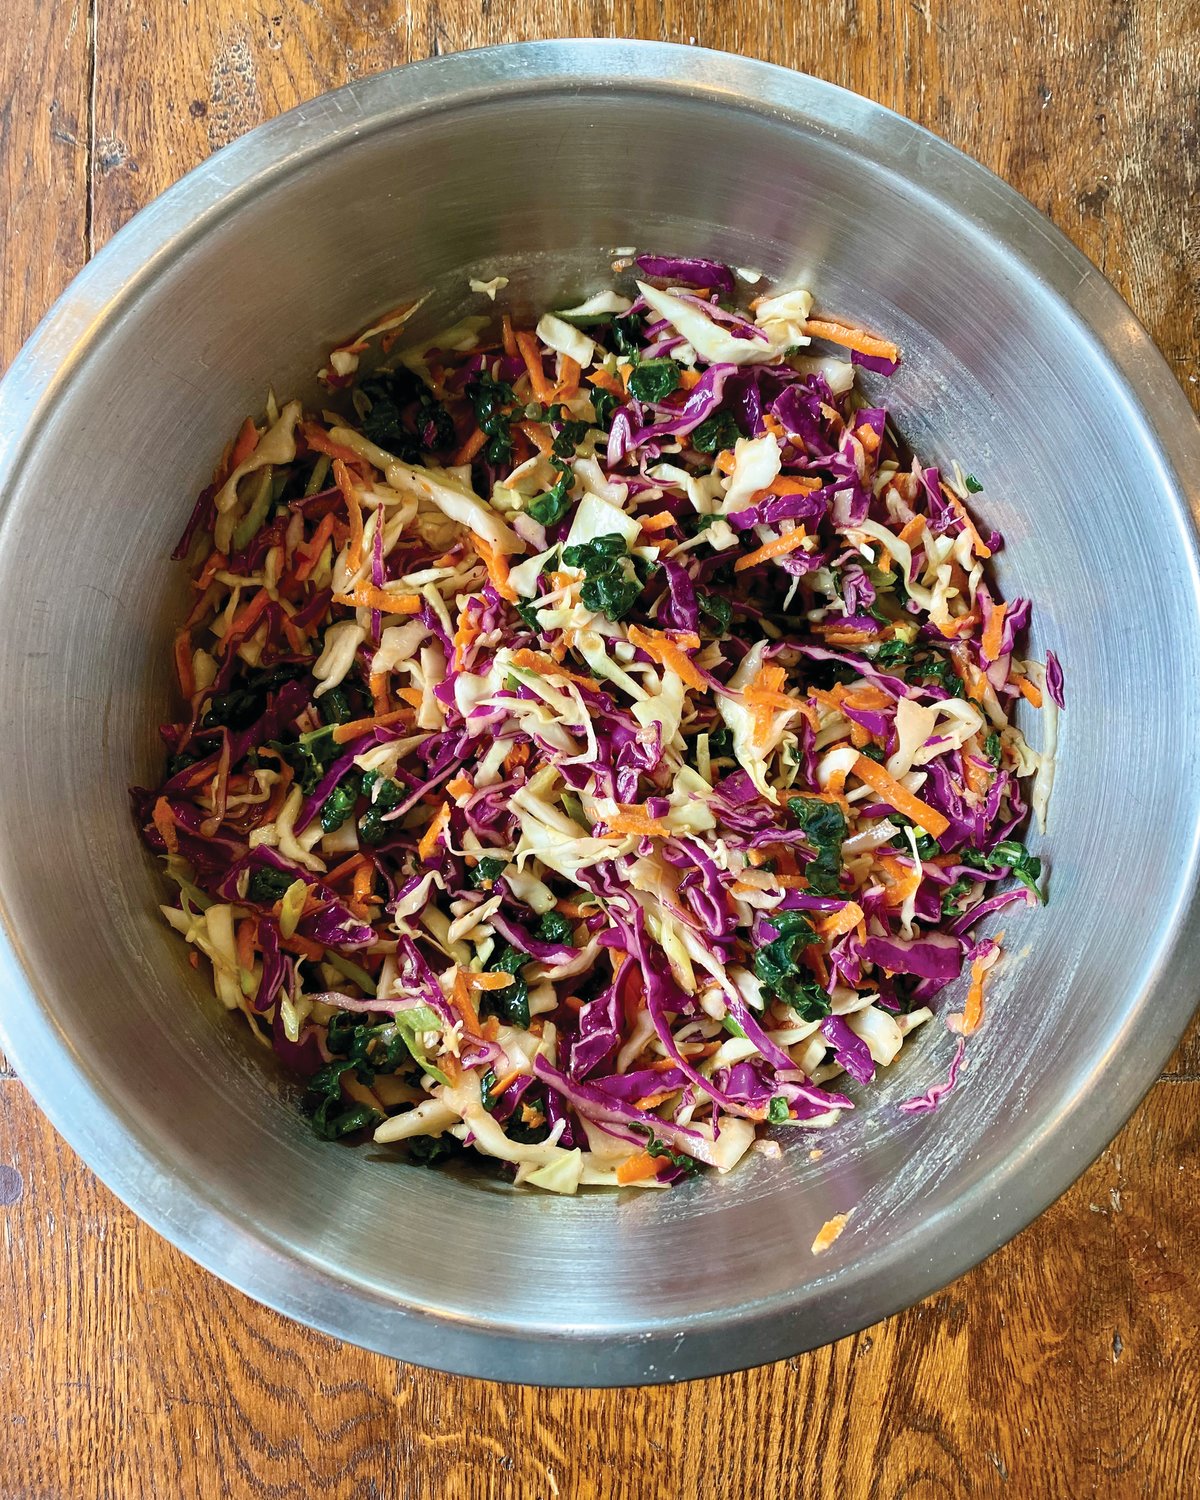 The key ingredient in this slaw is grated onion with its juices. It manages to bind this simple slaw together and provide the elusive je ne sais quoi that compels you to take another (and another) bite.